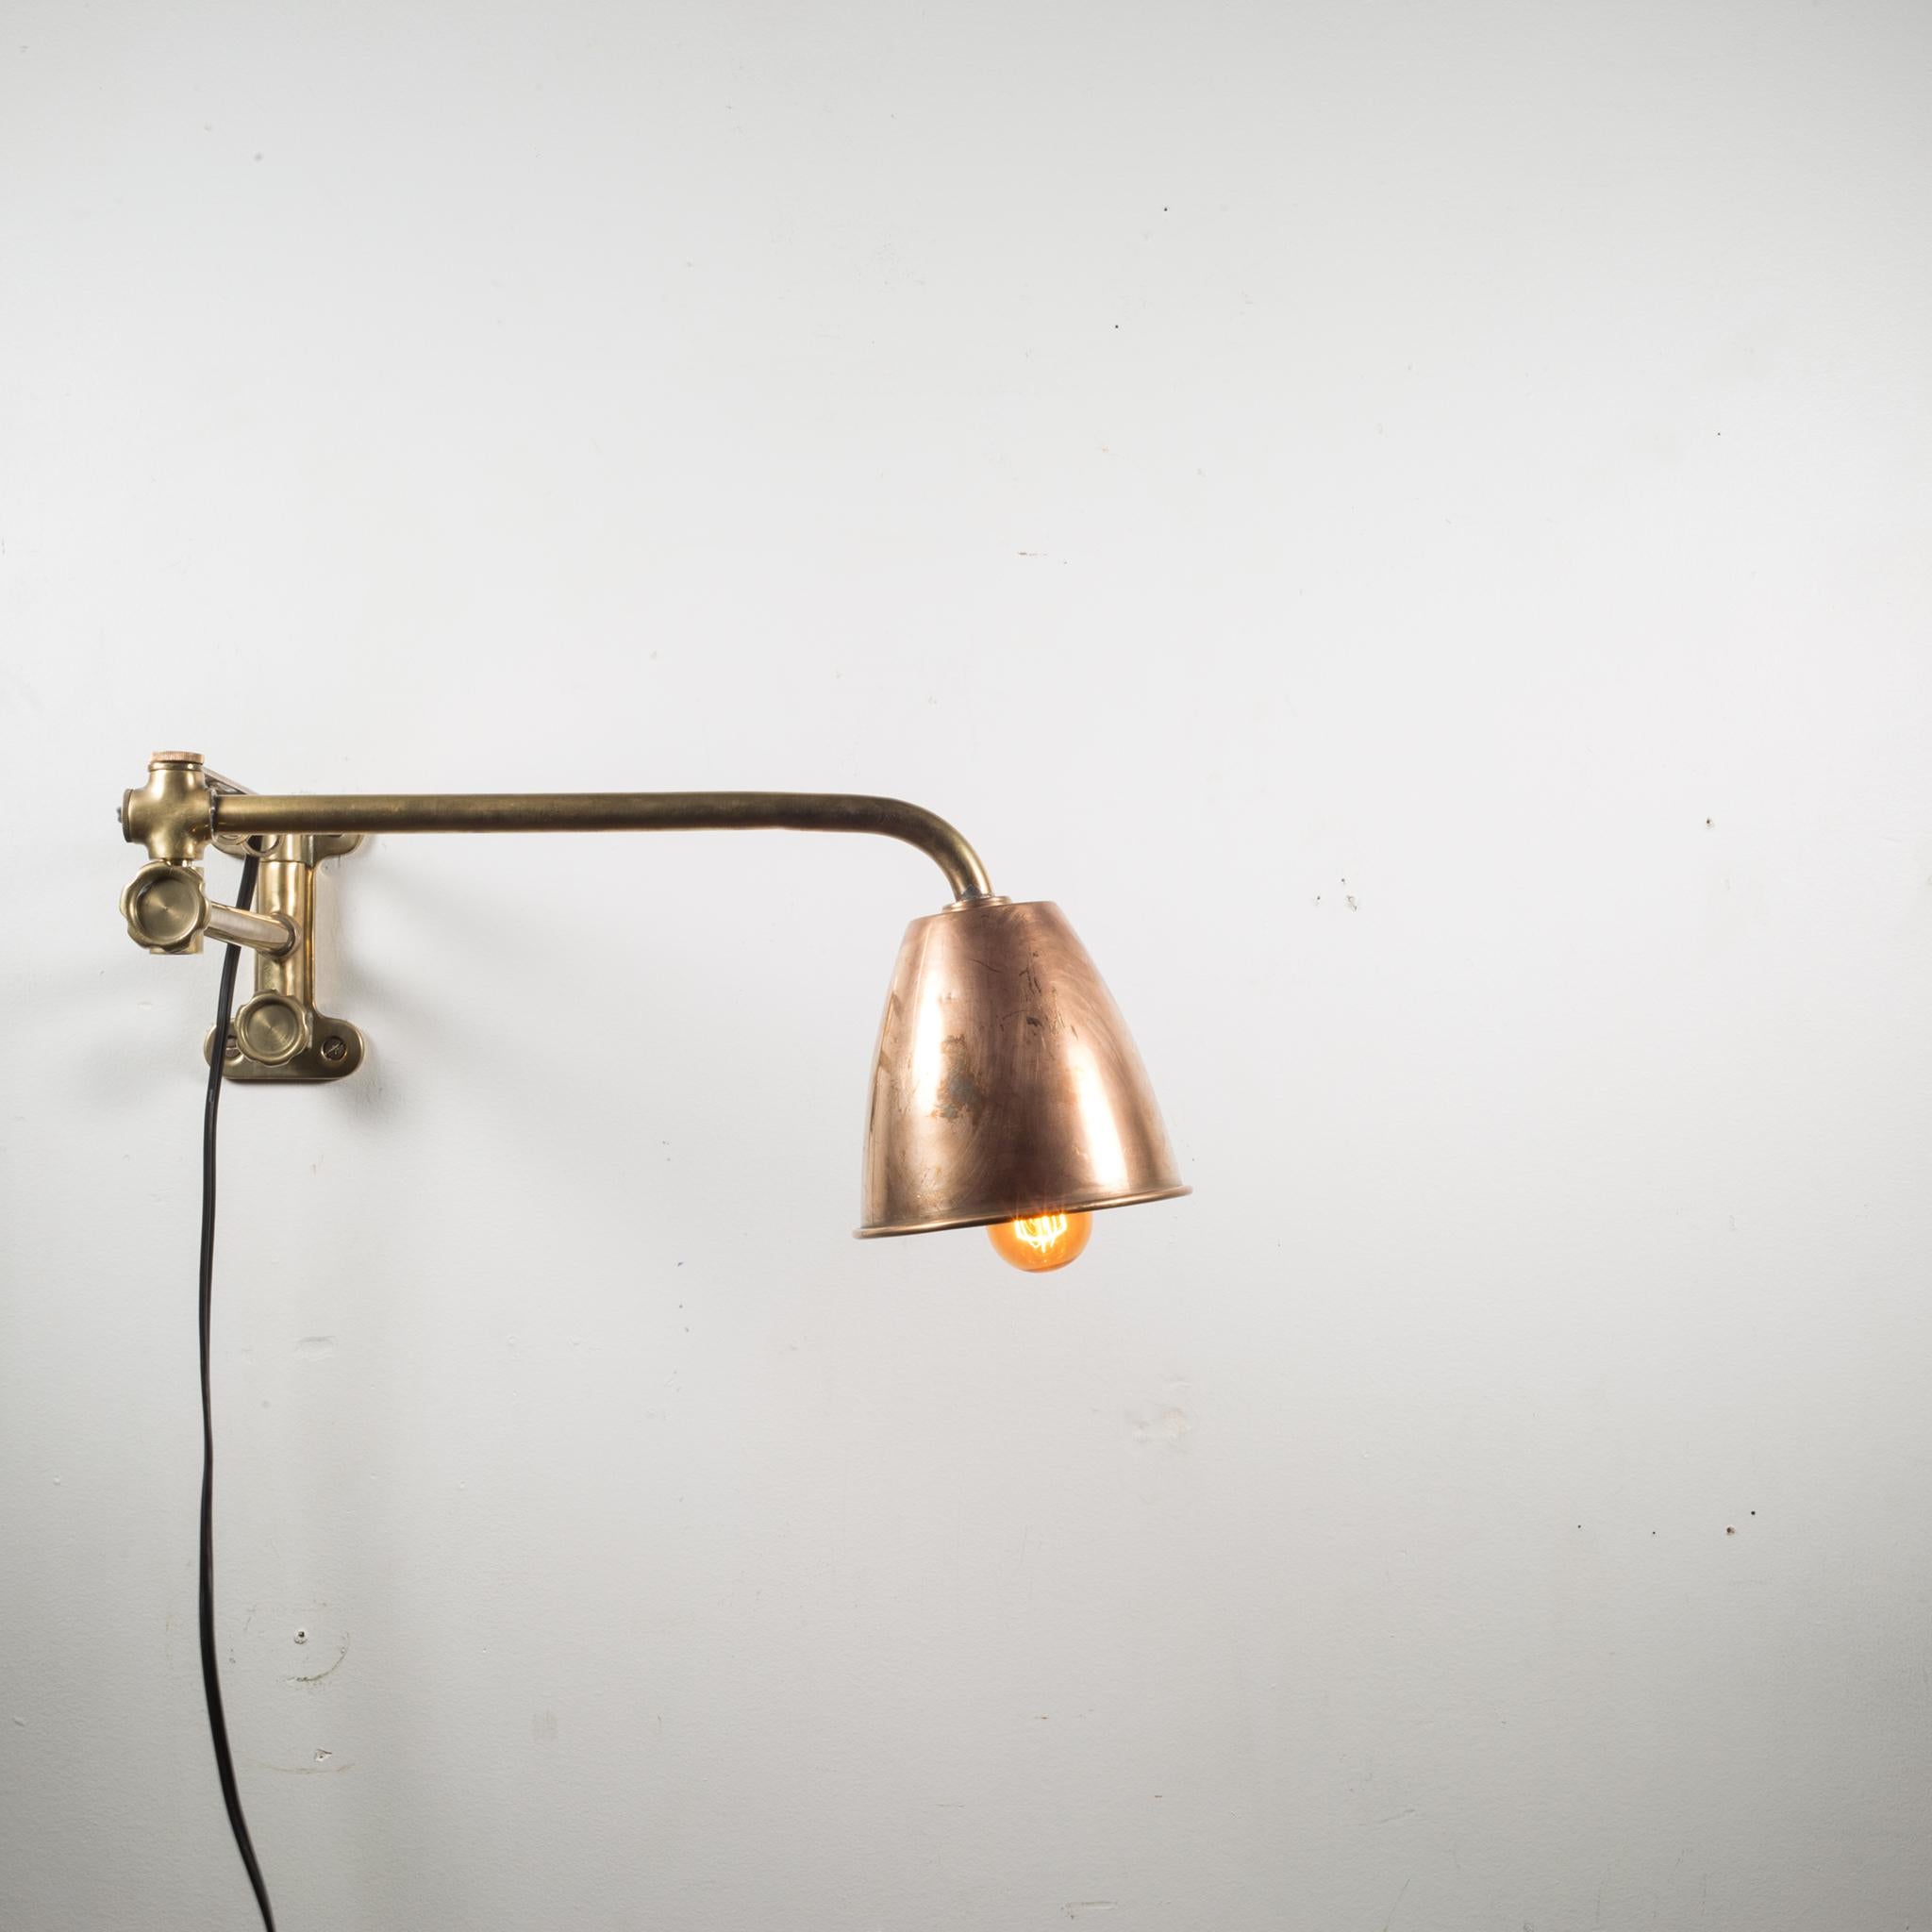 American Antique Solid Bronze and Copper Articulating Boat Sconce, circa 1900-1930